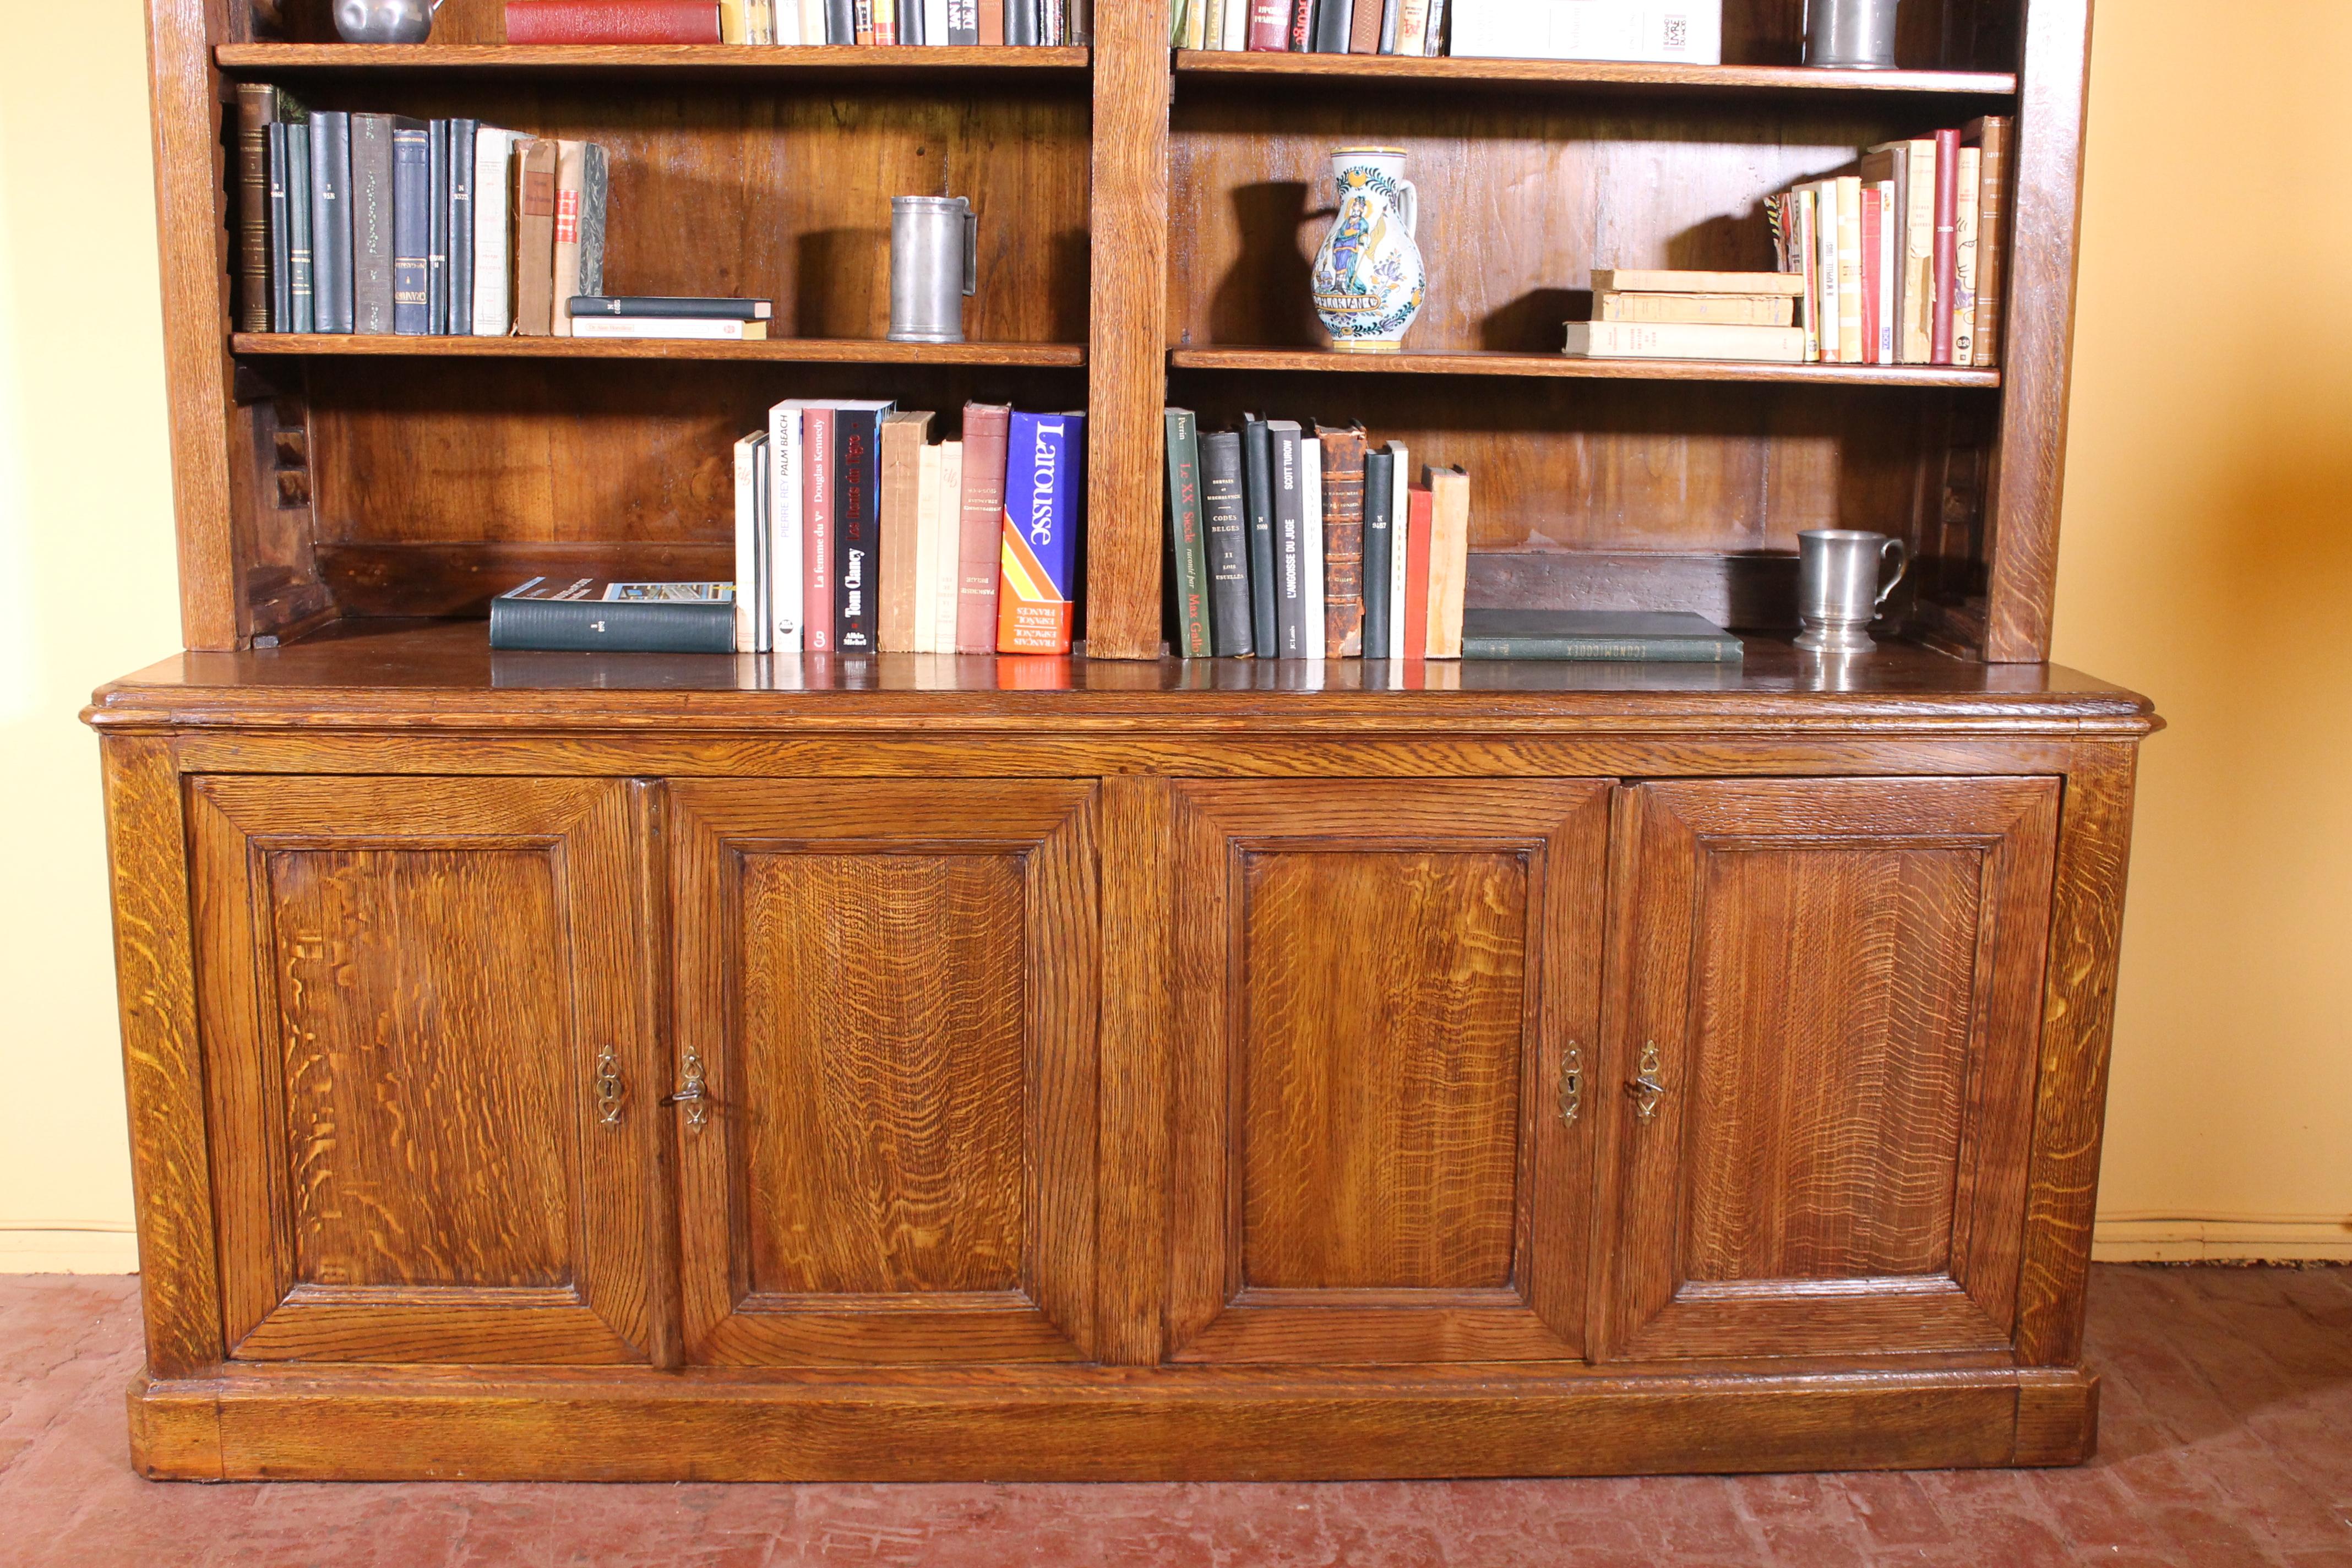 Beautiful 19th century French open bookcase in oak with beautiful proportions.
Beautiful open bookcase with four doors at the bottom and the interior with adjustable shelves.

Very nice well proportioned piece and superb original corniche

In